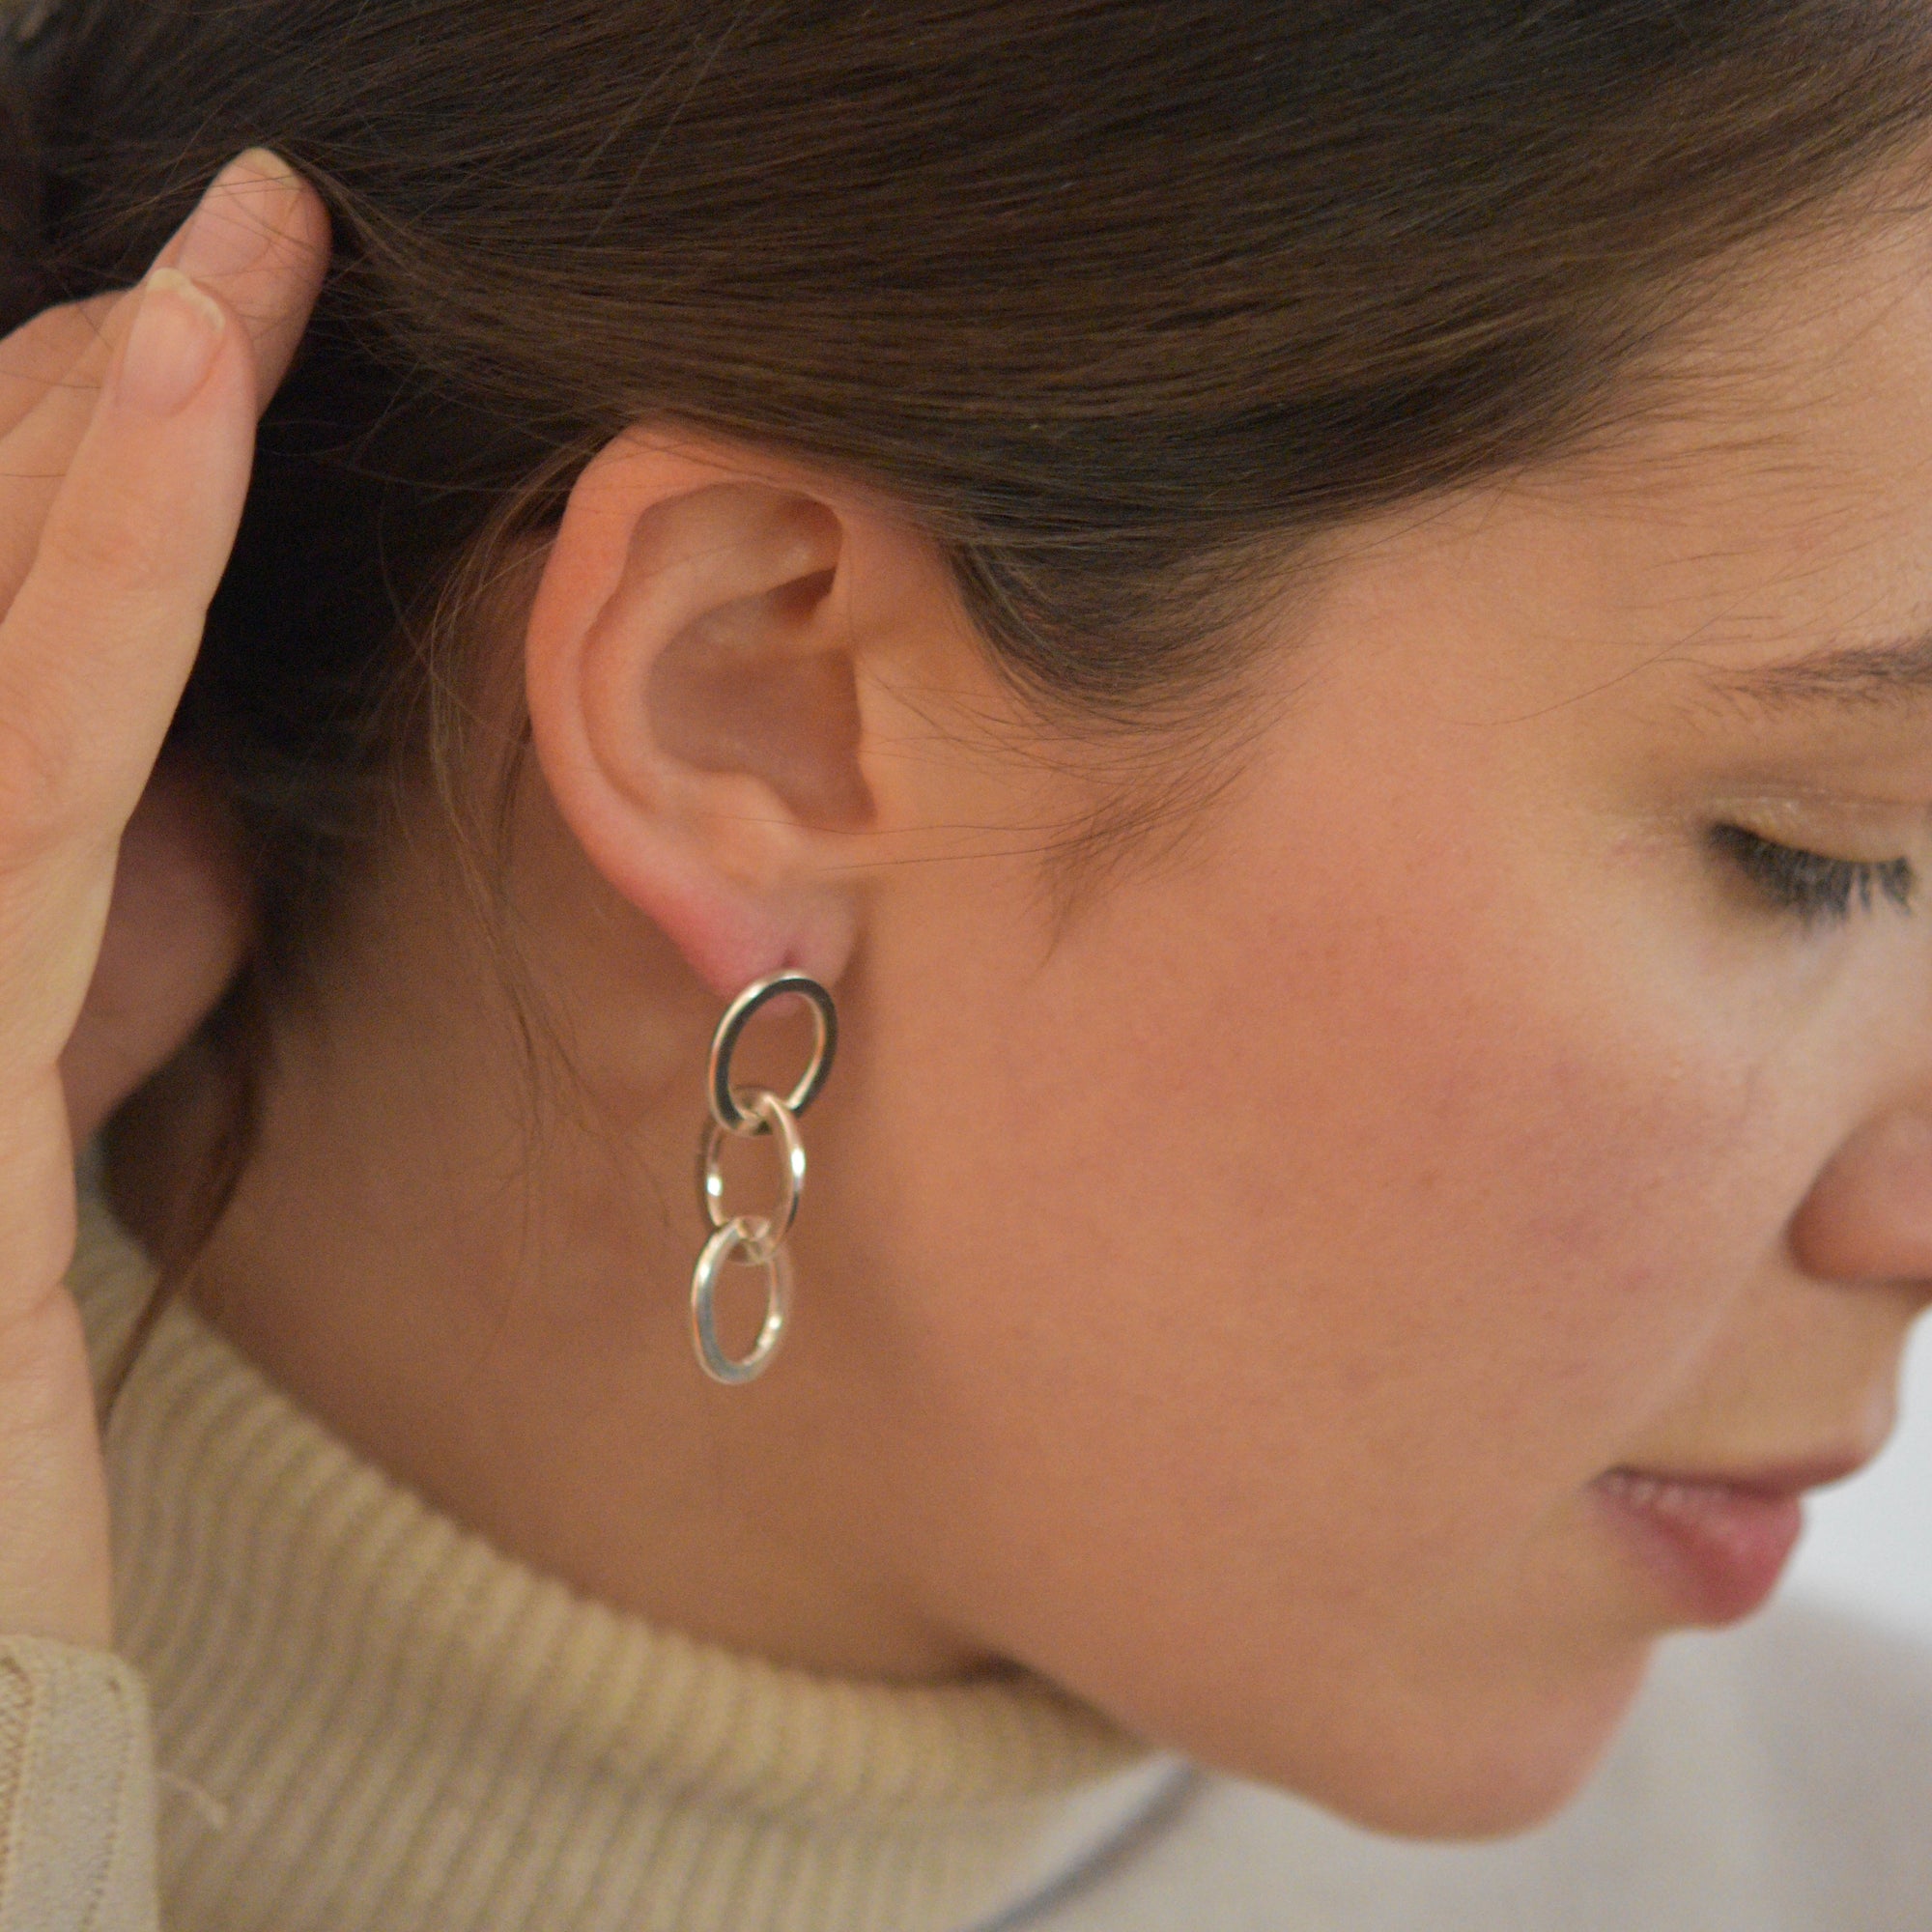 Image of the flattened triple link earrings on a model for scale.